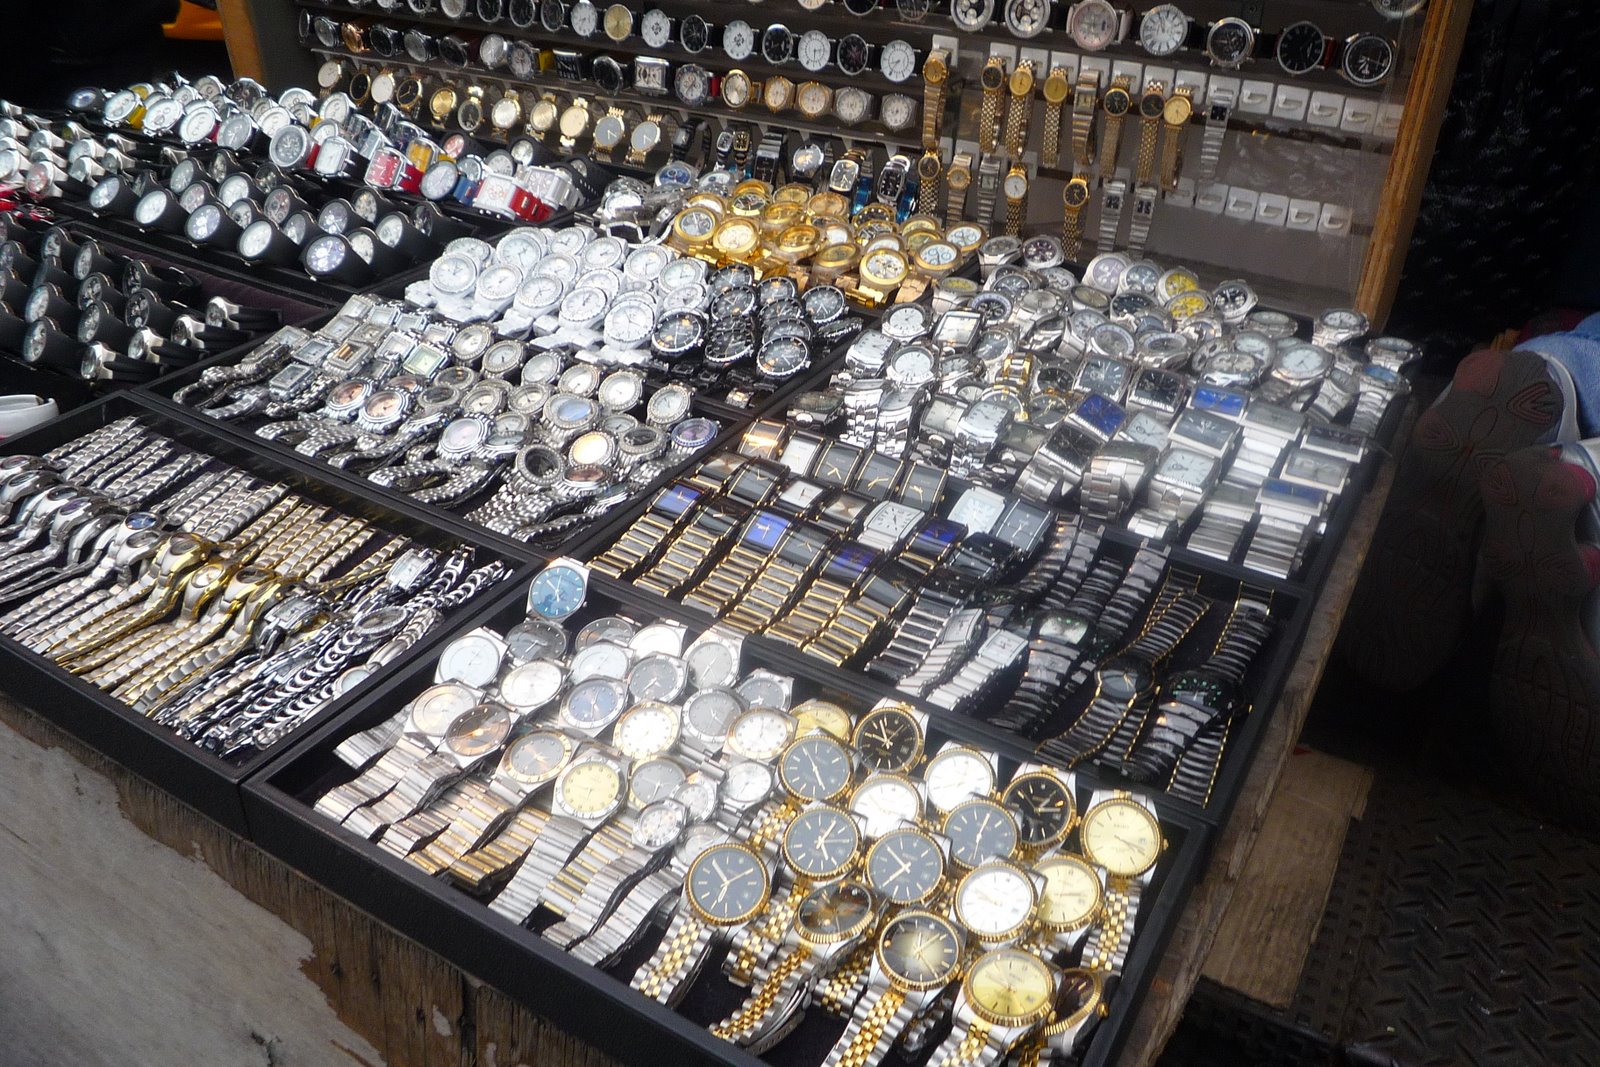 Canal Street Fake Watches